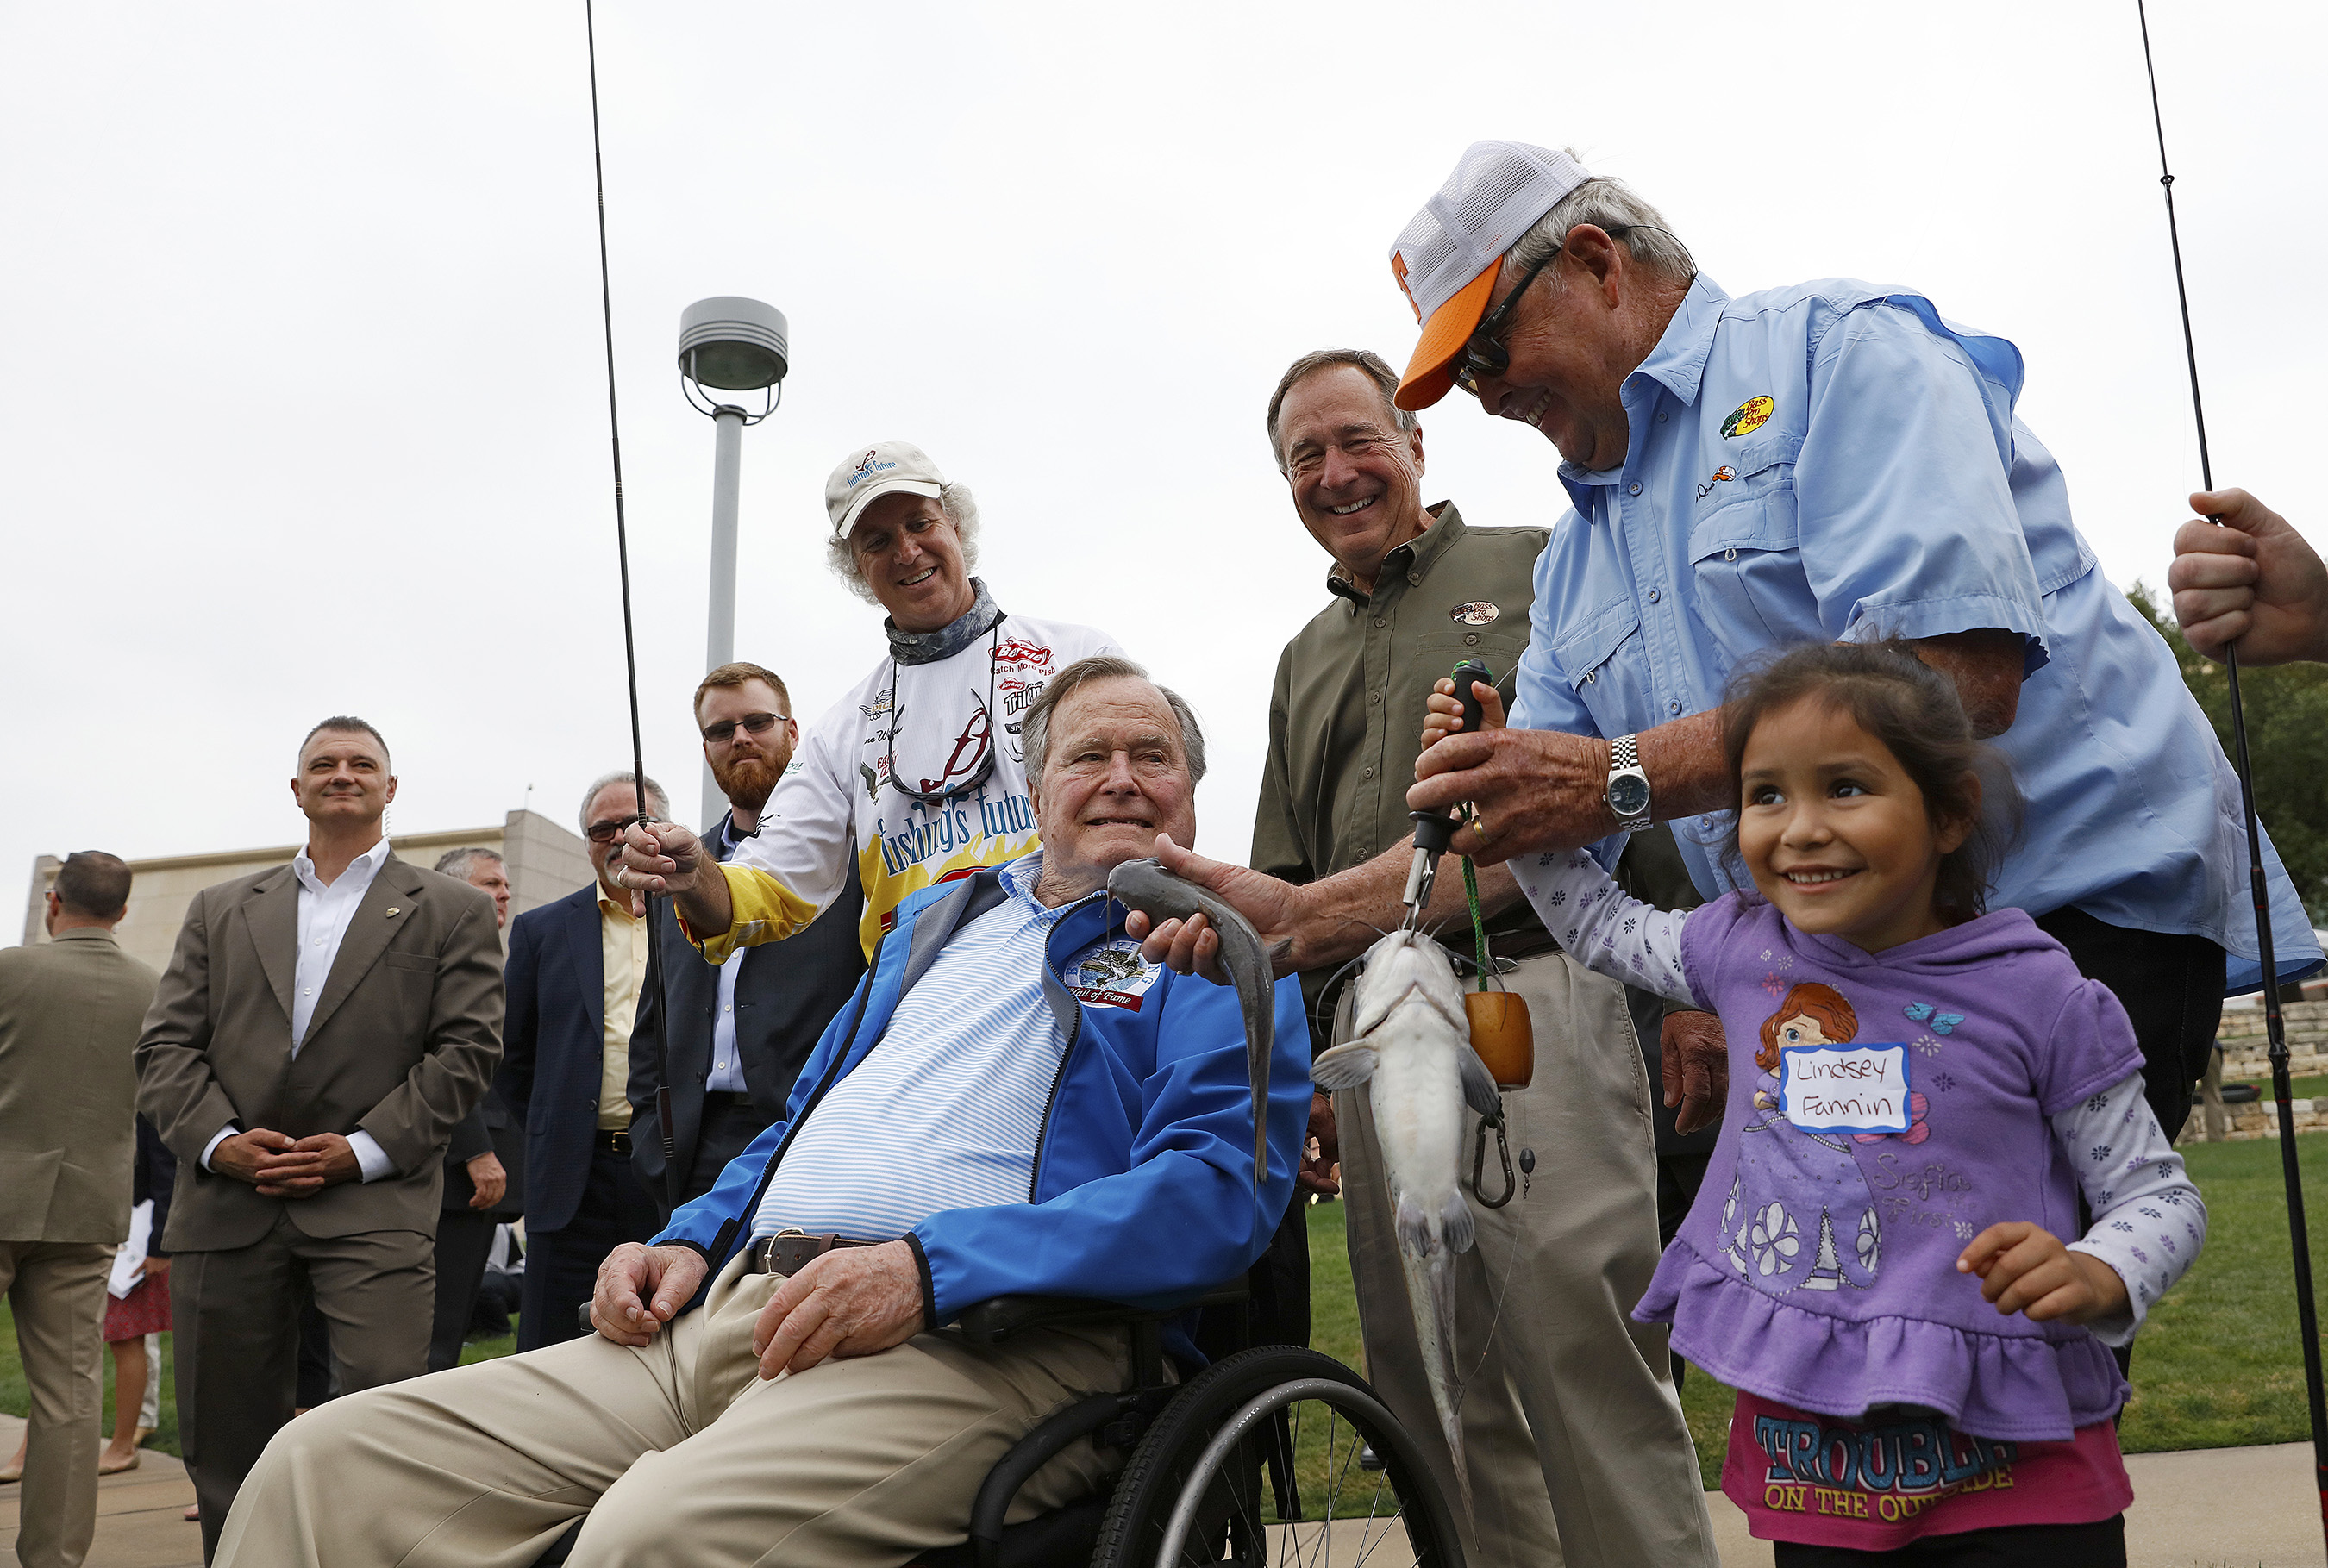 President George H.W. Bush, center, fishes with local children during a Recreational Boating & Fishing Foundation (RBFF) event at the George Bush Presidential Library on Thursday, April 14, 2016, in College Station, Texas. RBFF is a nonprofit organization whose mission is to increase participation in recreational angling and boating, thereby protecting and restoring the nation’s aquatic natural resources. (Aaron M. Sprecher/AP Images for RBFF)